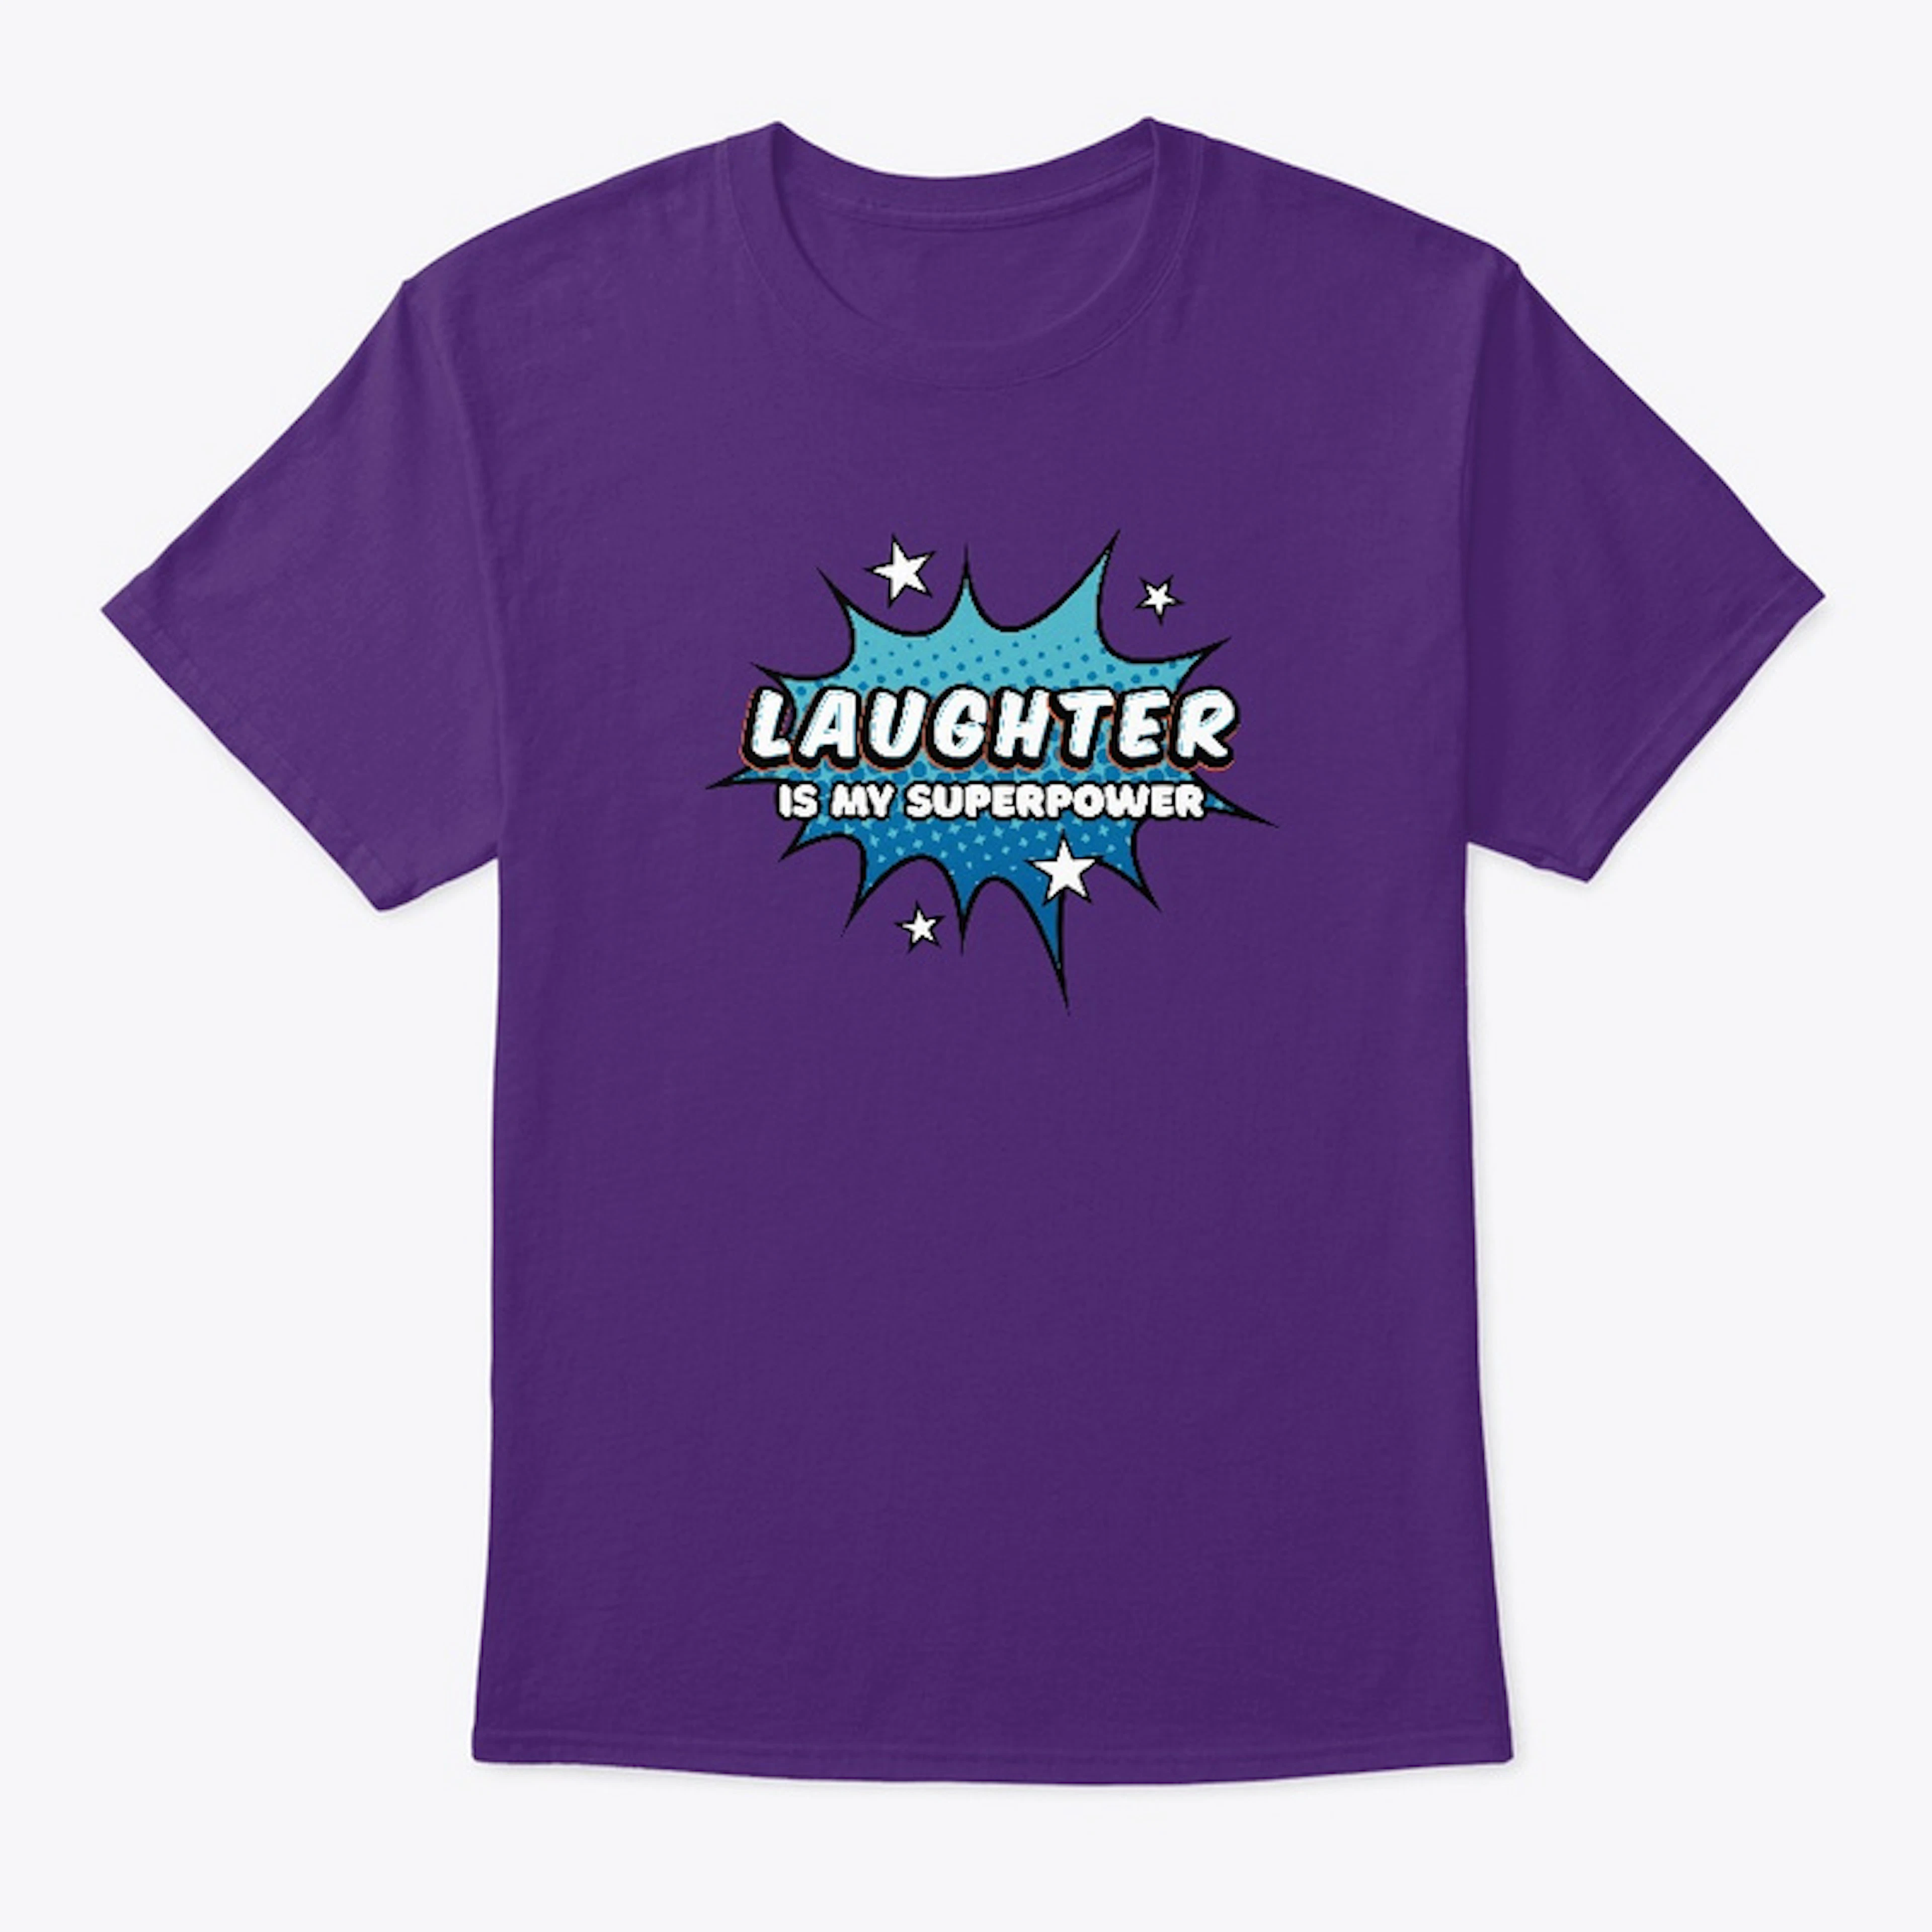 Laughter is my superpower